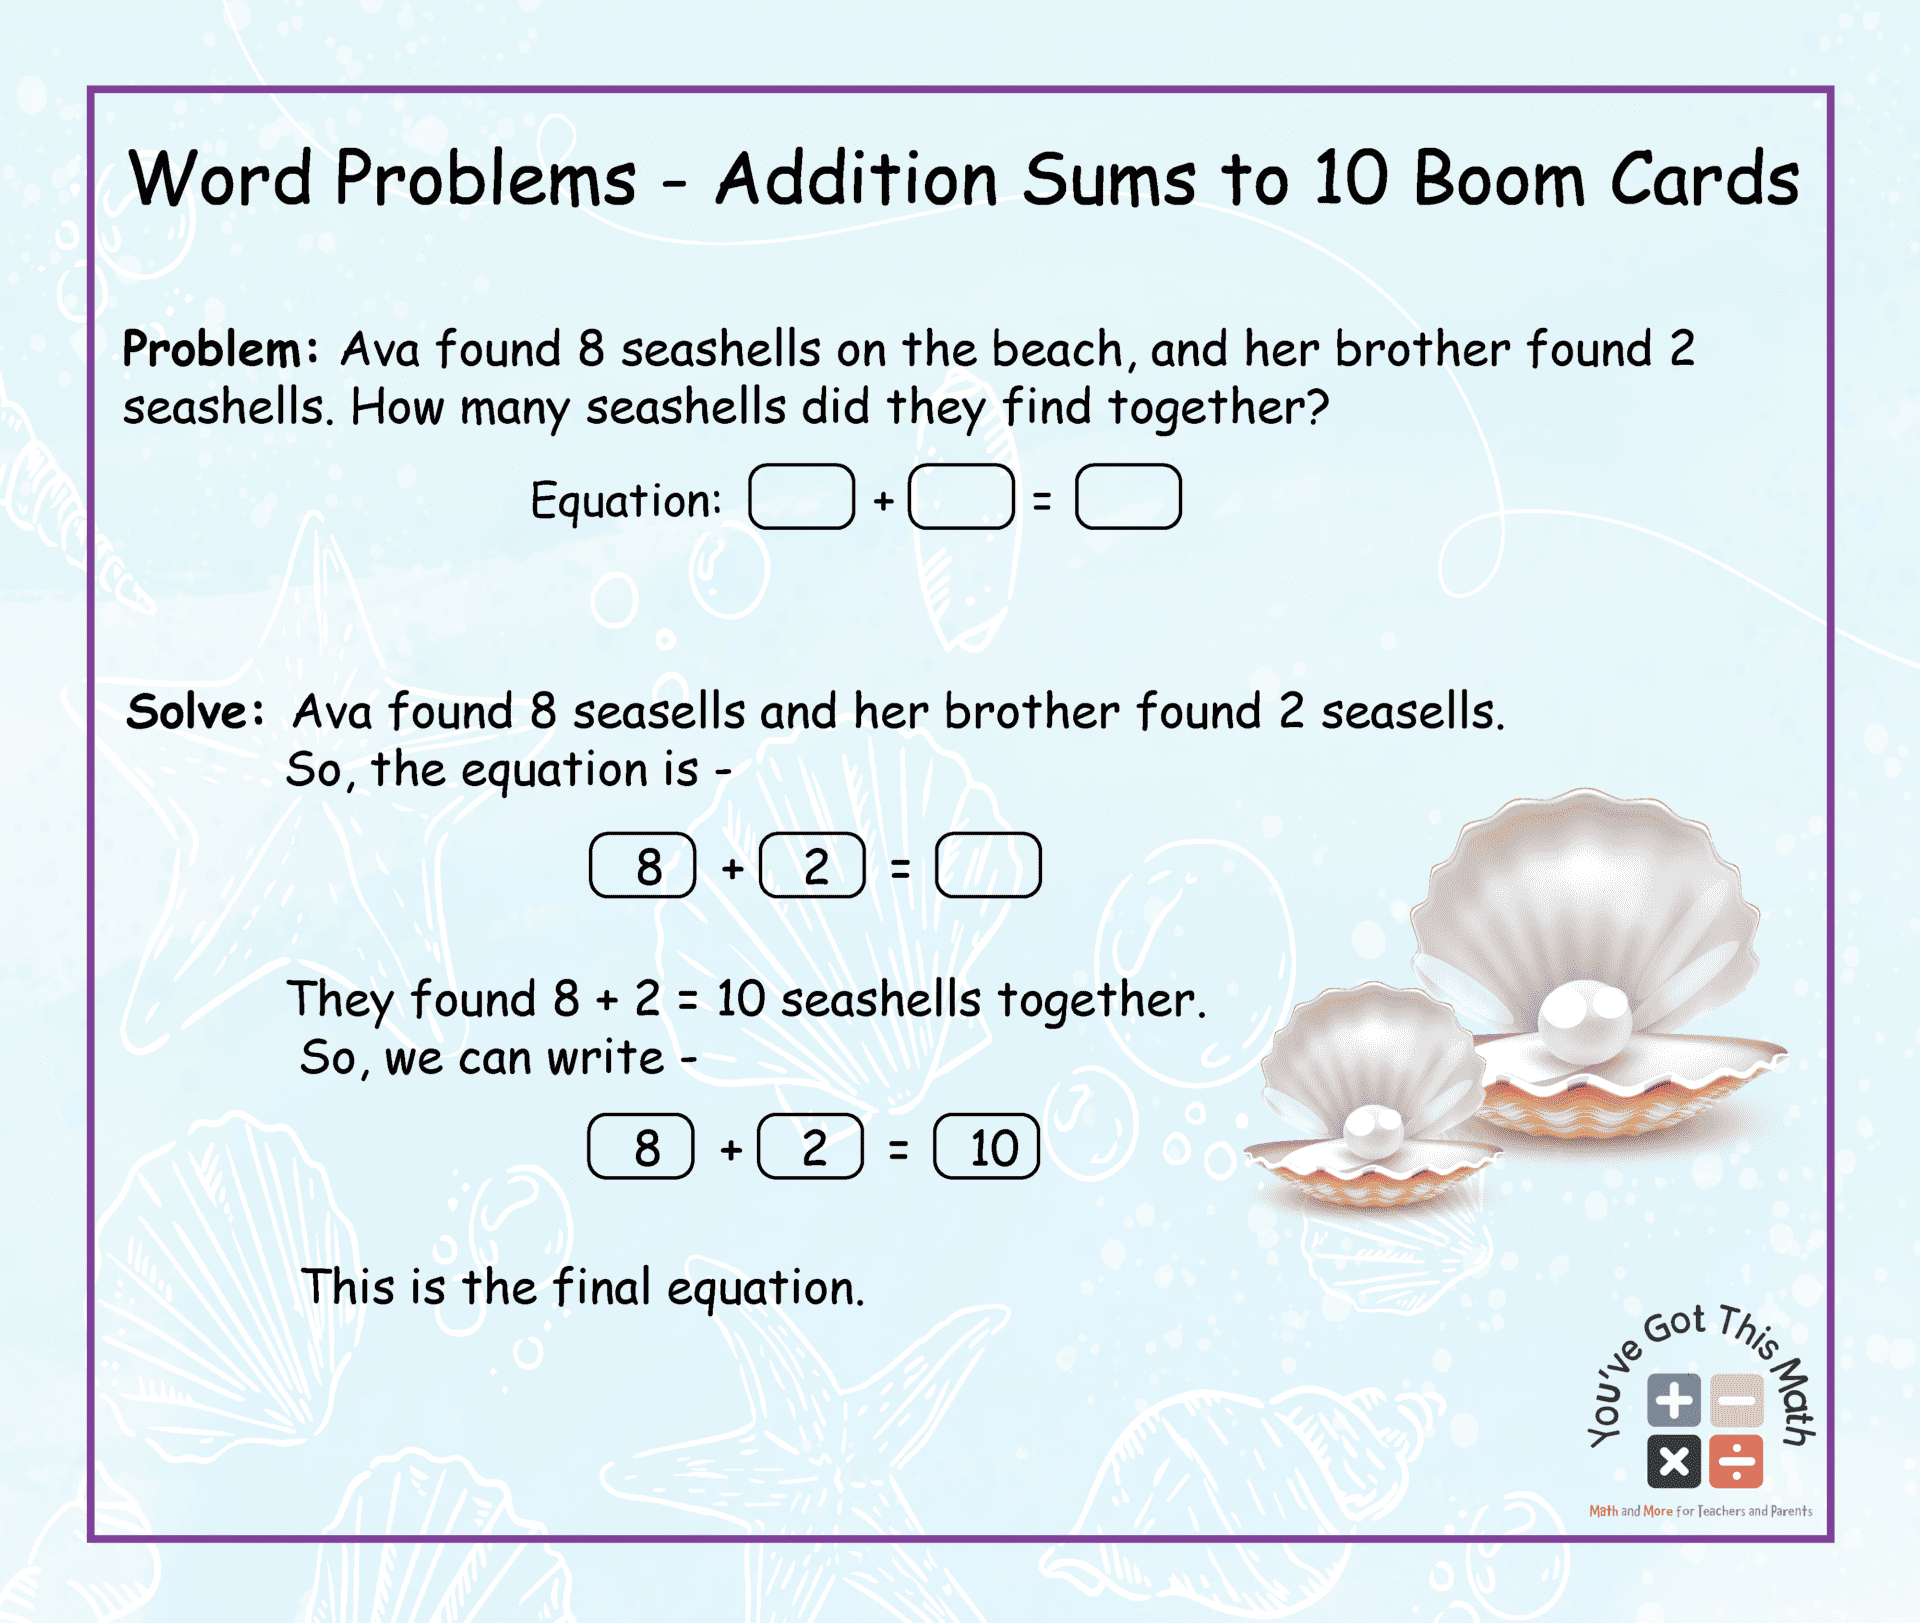 Word Problems - Addition Sums to 10 Boom Cards